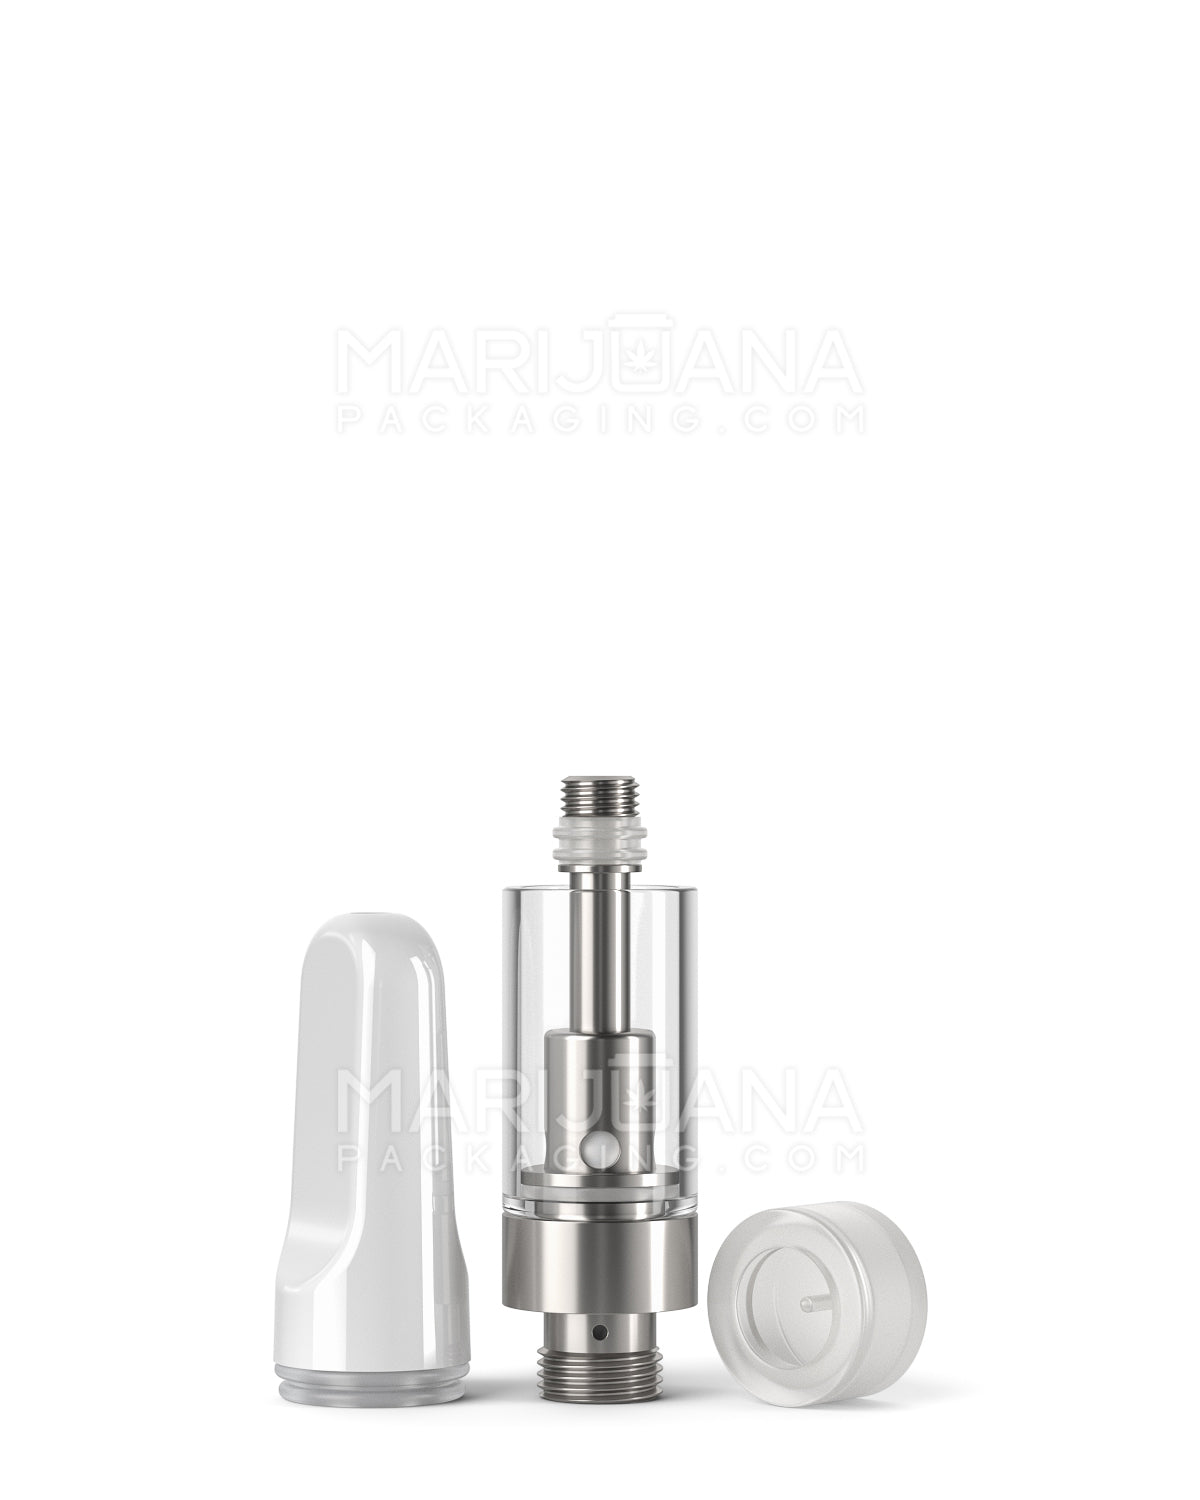 CCELL | Liquid6 Reactor Glass Vape Cartridge with White Ceramic Mouthpiece | 0.5mL - Screw On - 100 Count - 5